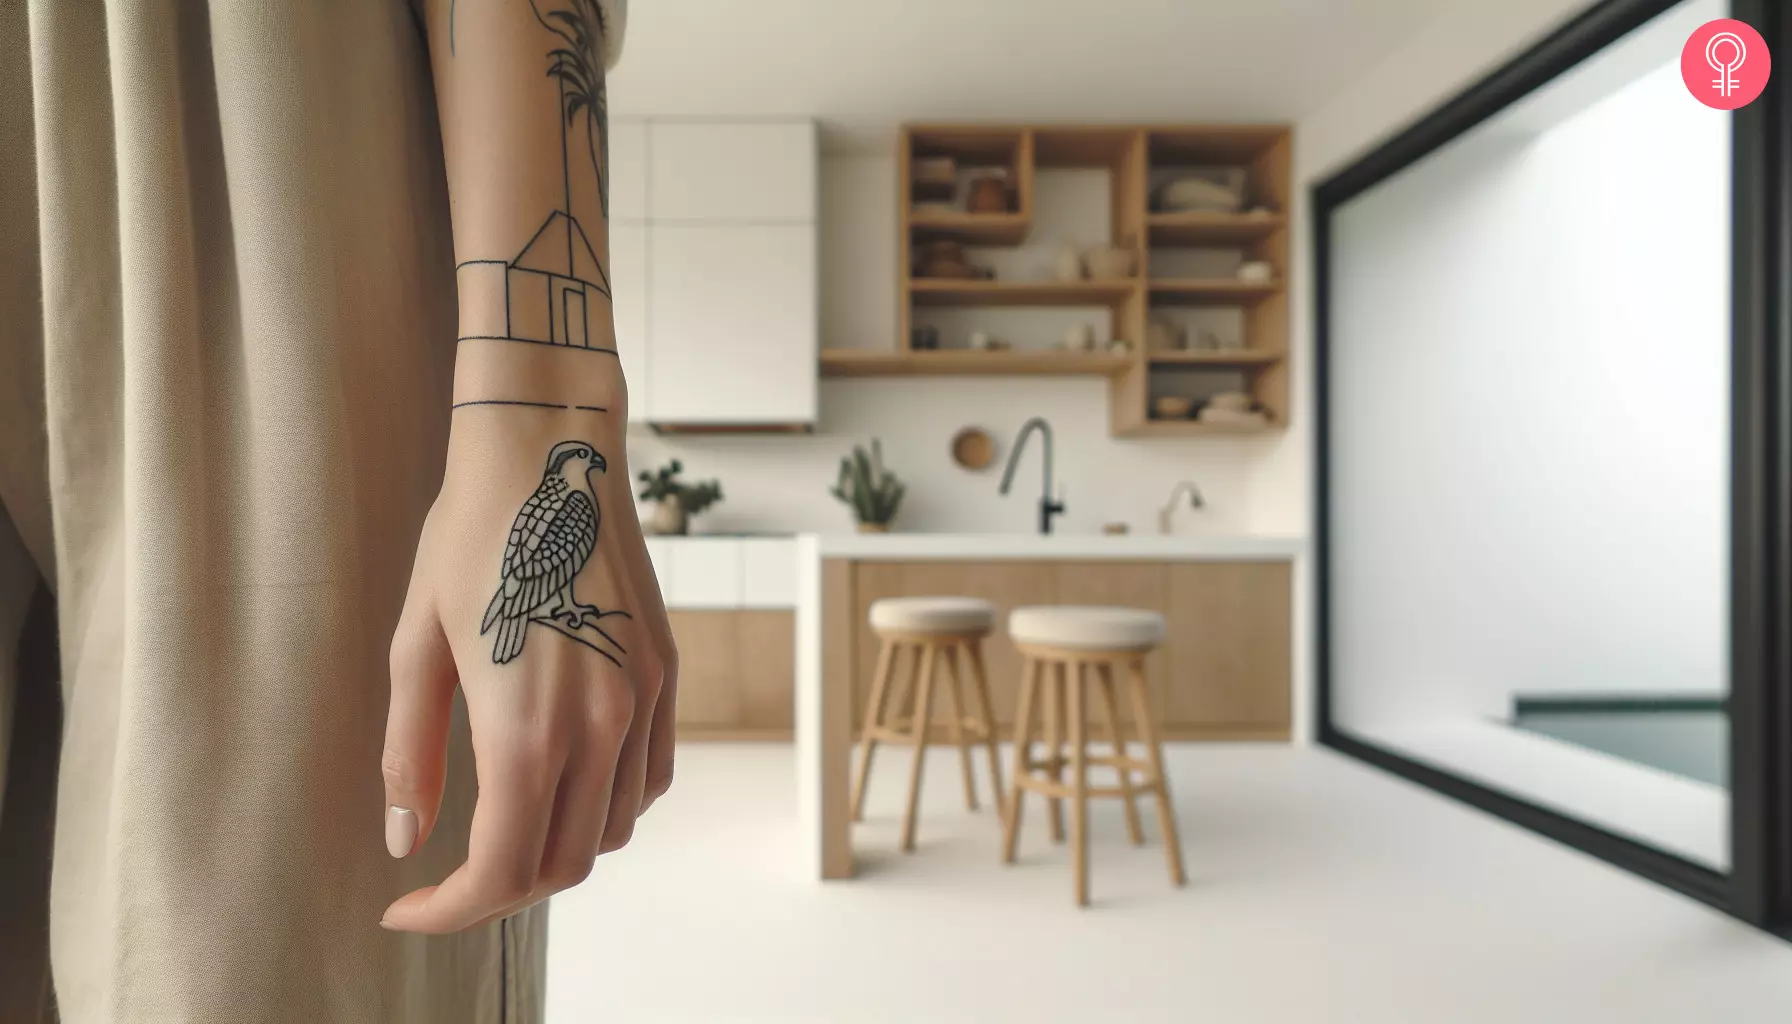 A minimalist osprey tattoo on the back of the hand